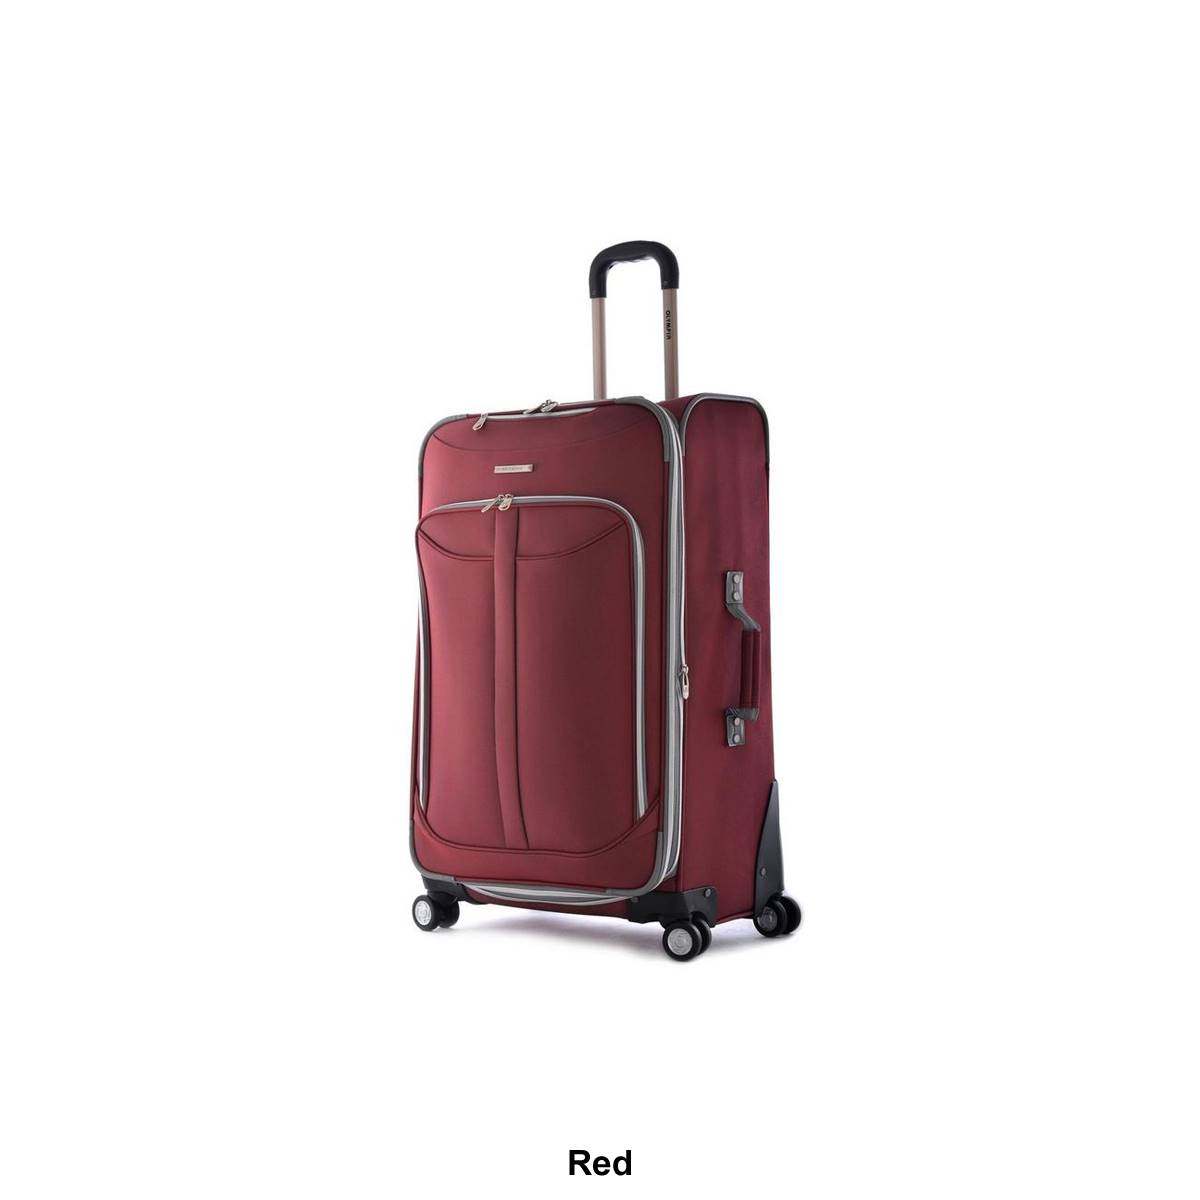 Olympia USA 25in. Tuscany Spinner Luggage